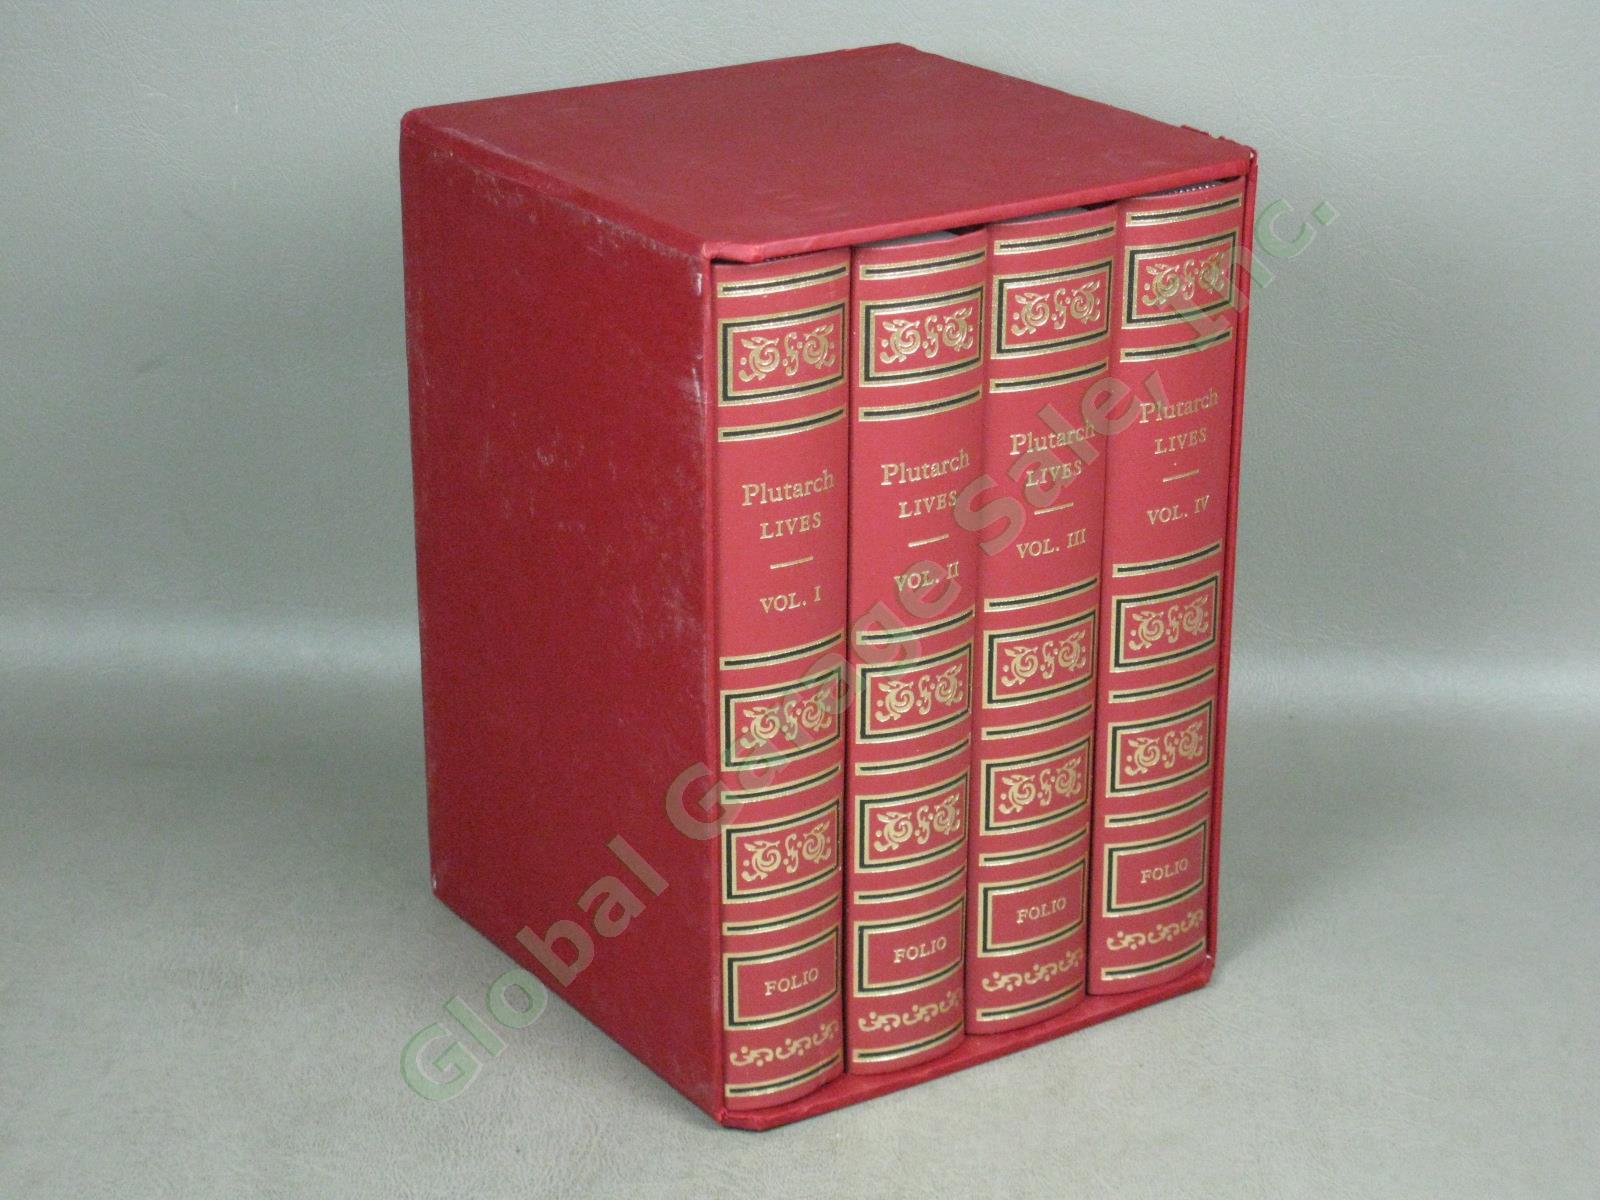 Plutarch Lives Folio Society 4-Volume Set I II III IV Hardcover Mint Condition!